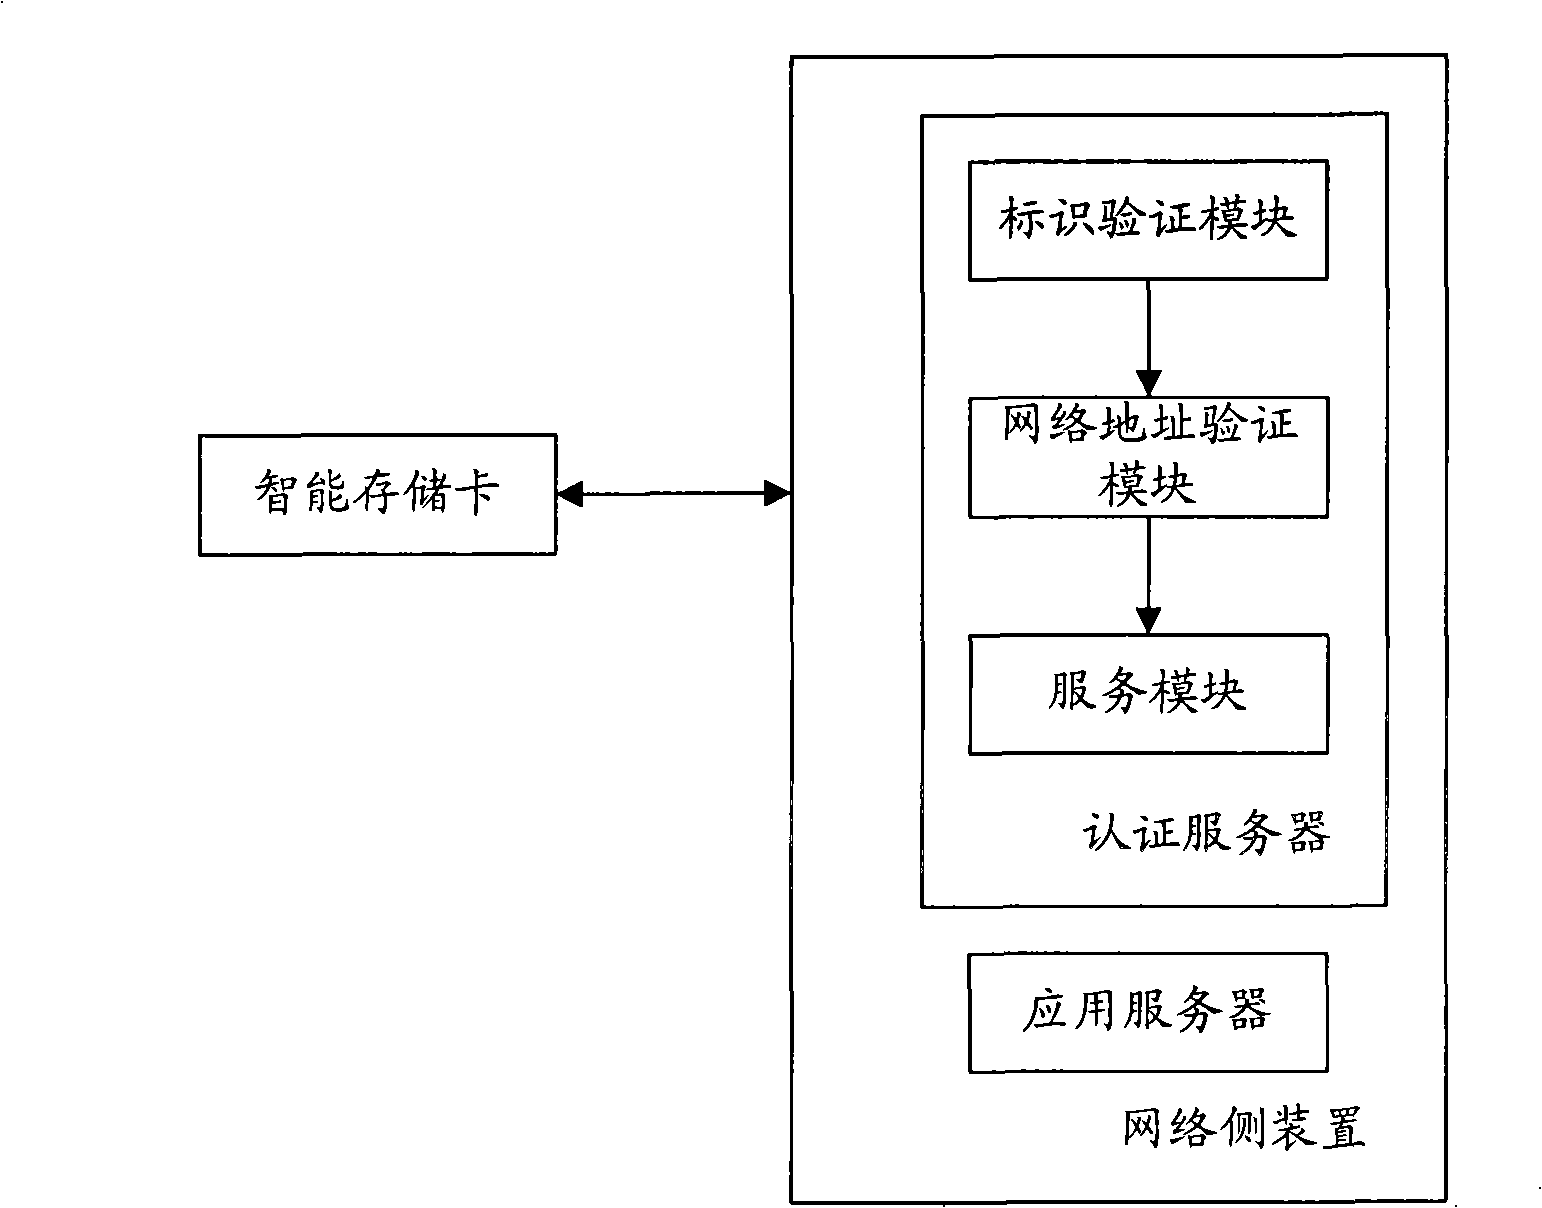 Method and apparatus implementing remote access control based on portable memory apparatus